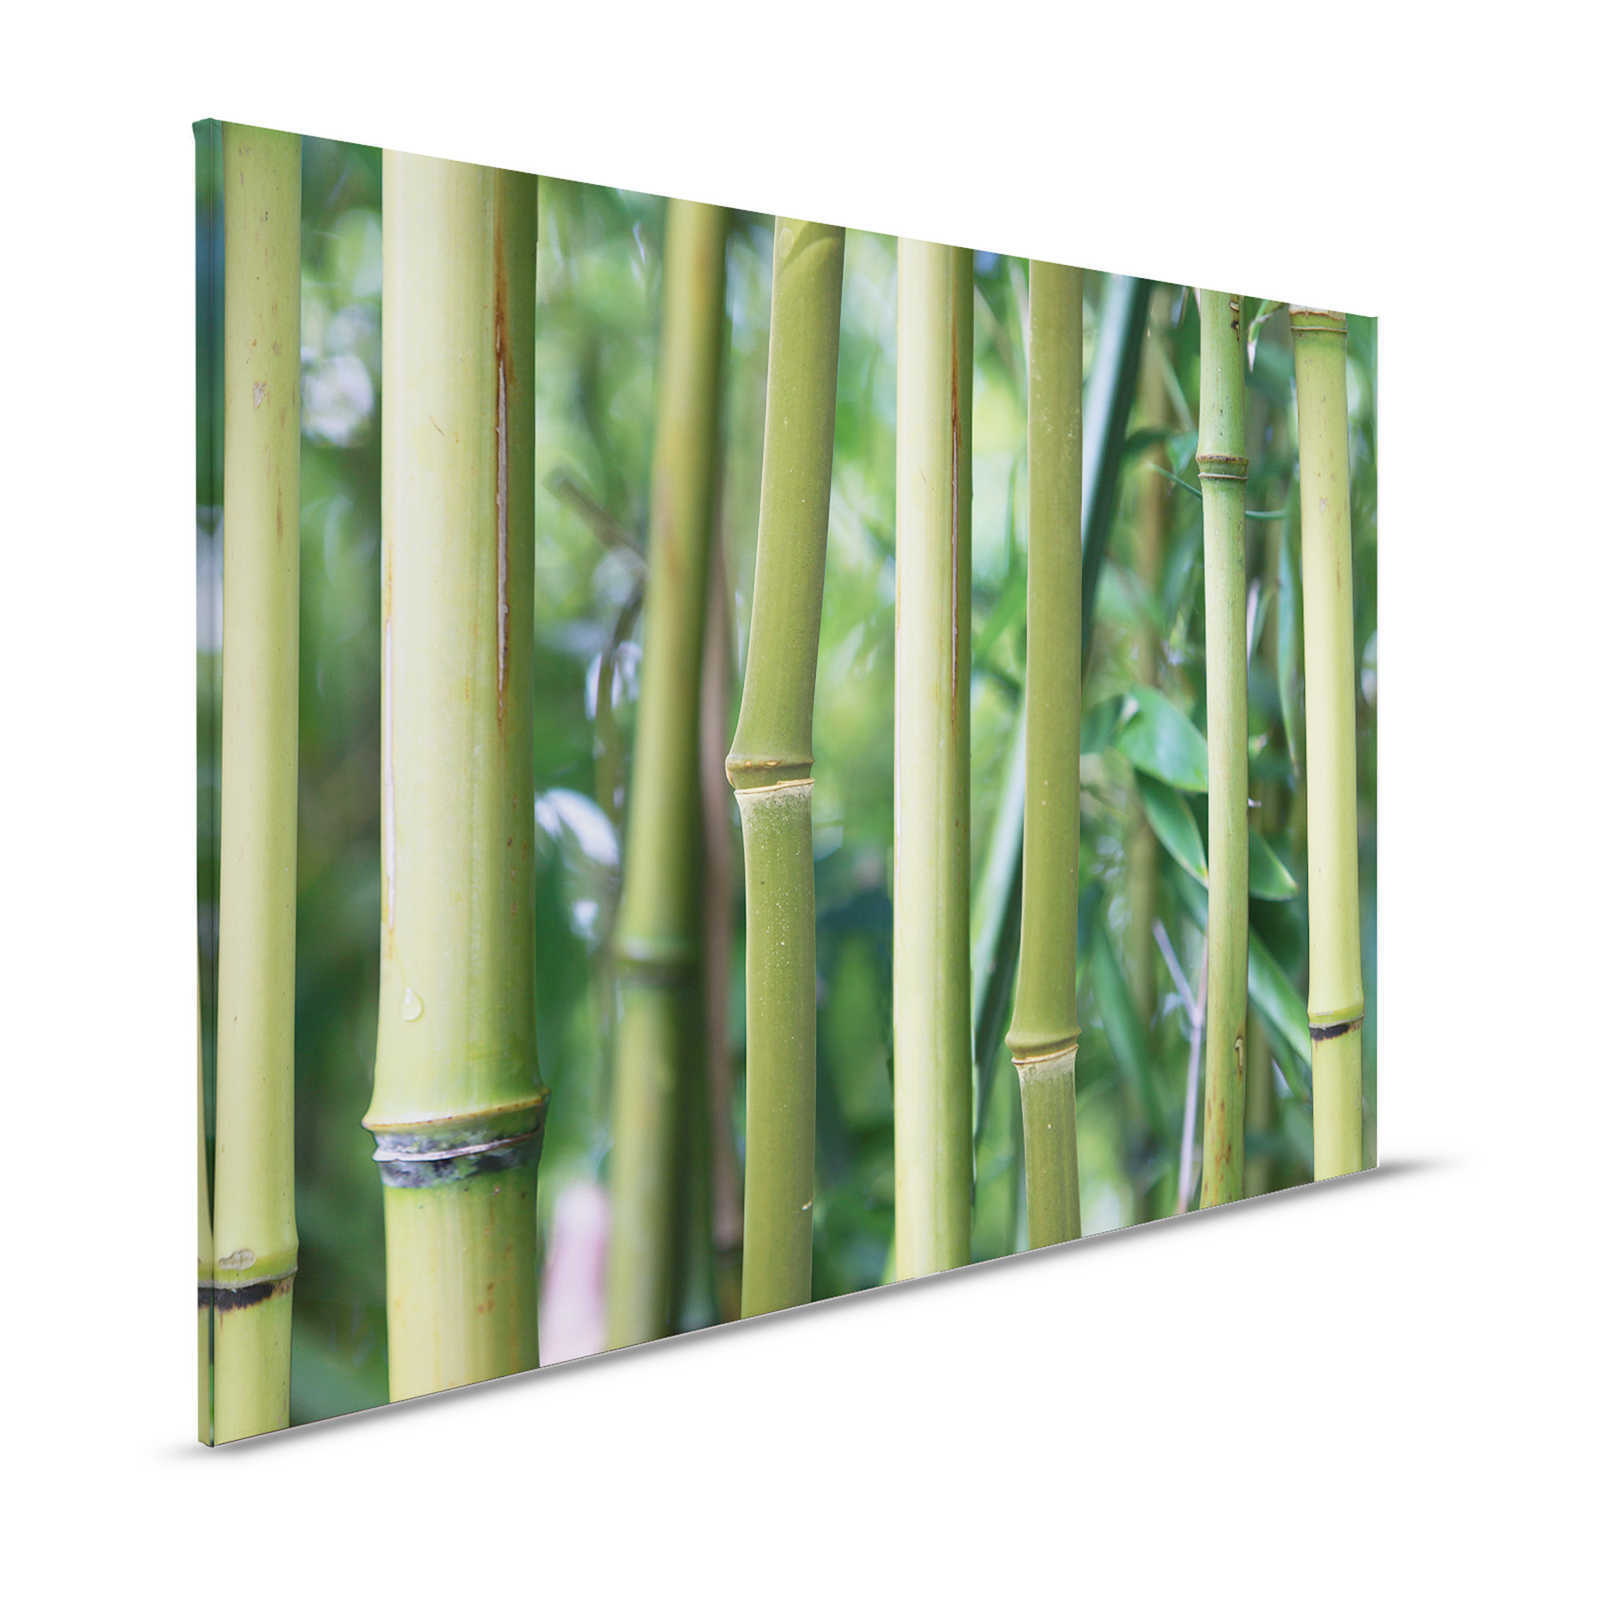 Bamboo Canvas painting Bamboo Forest with detail view - 1,20 m x 0,80 m
